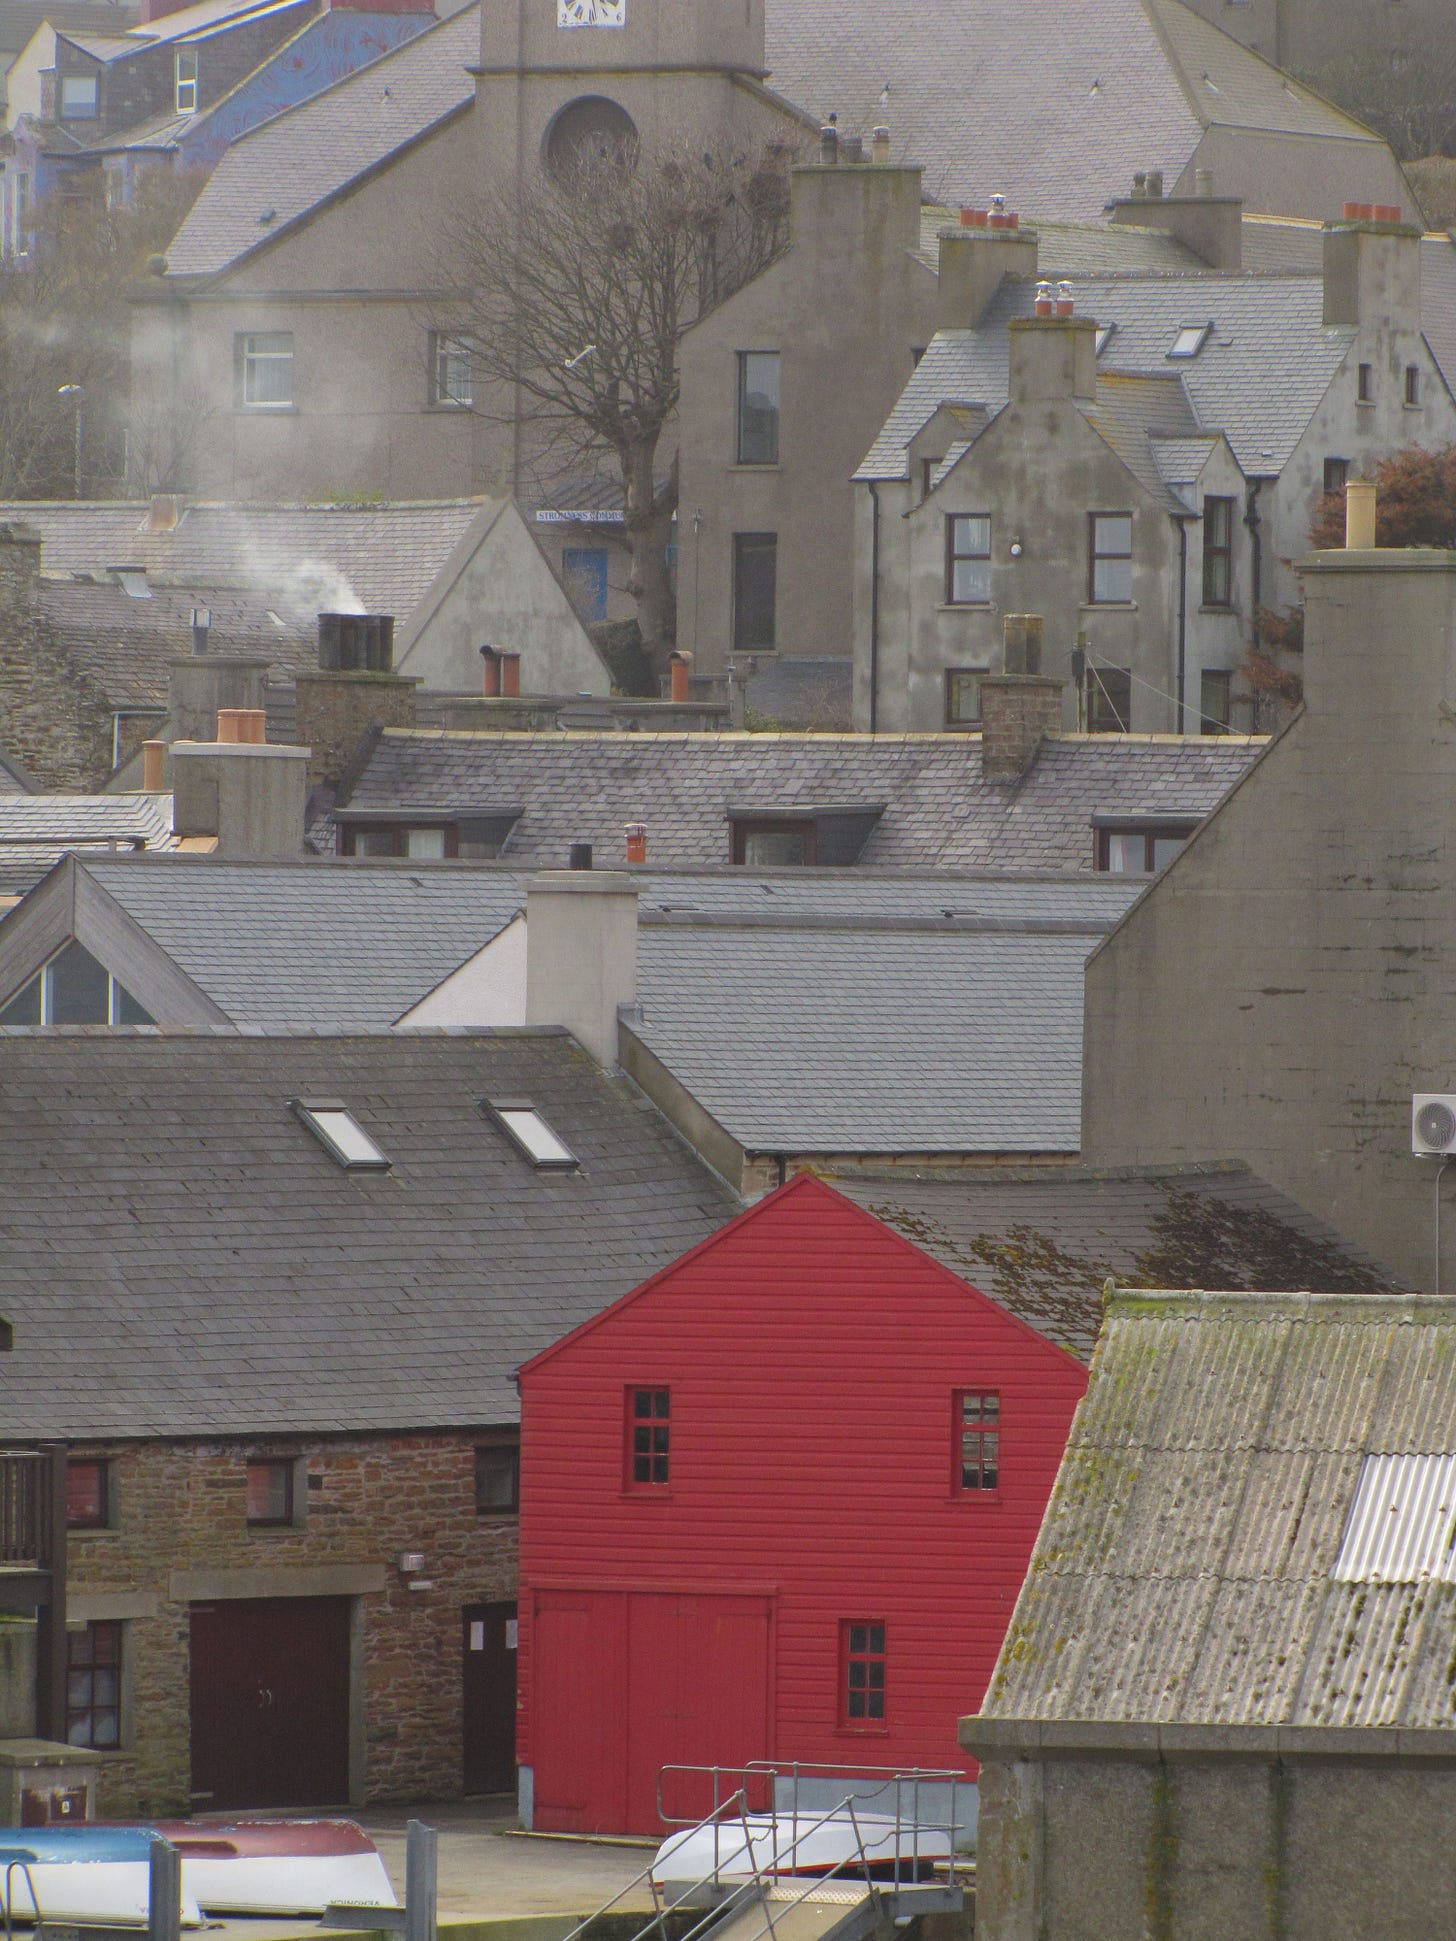 Houses and buildings climb up the hill of Brinkies Brae in Stromness, Orkney. One is painted red, but most are grey or beige, blending into the rock of the island. Smoke rises from one chimney and boats are overturned on a pier.